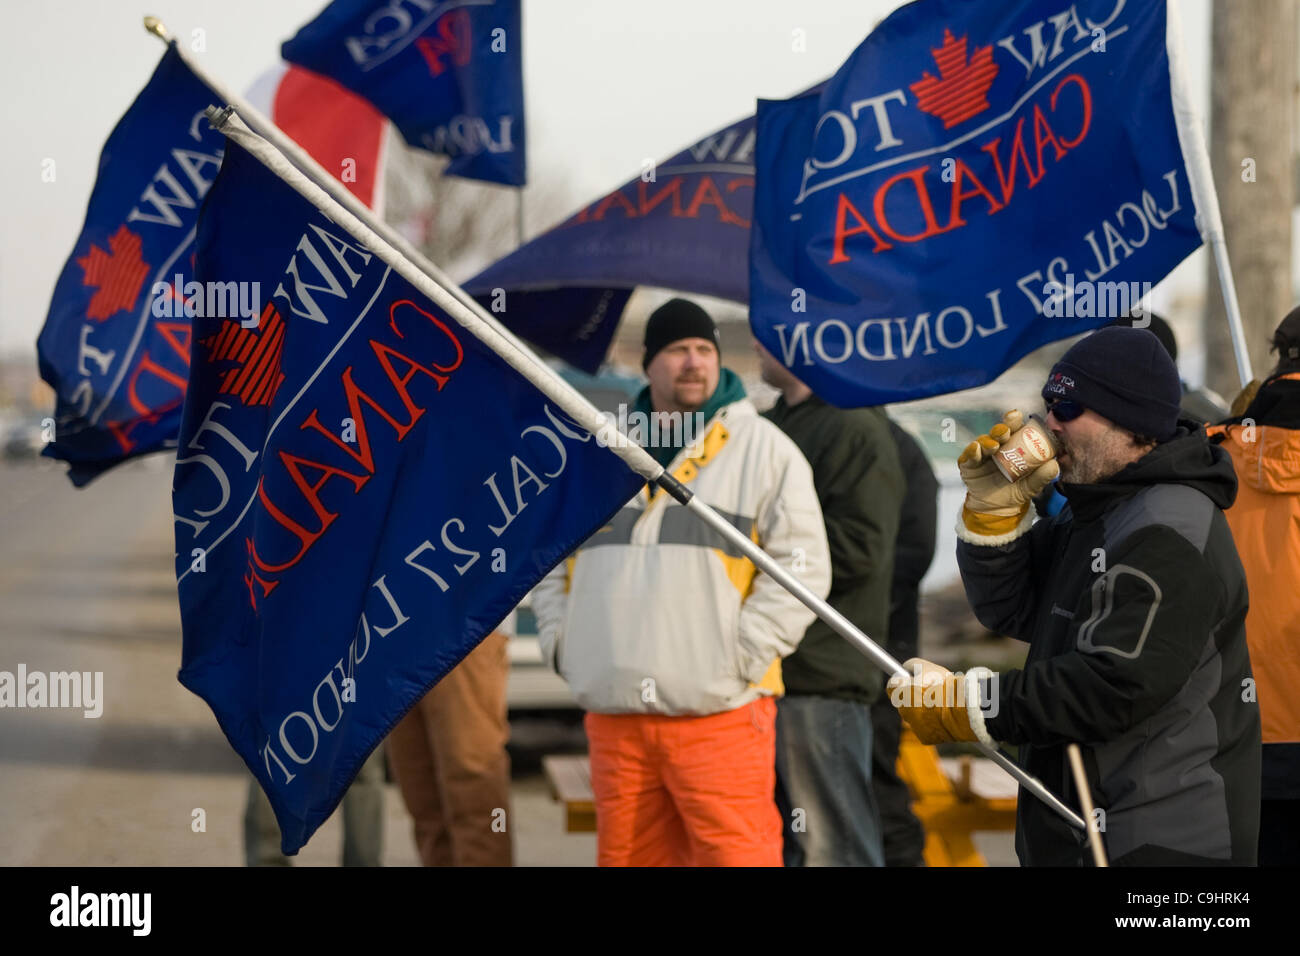 London Ontario, Canada - January 9, 2012. Locked out Electro Motive workers walk the picket line in front of the factory located in London. The company, owned by Caterpillar locked out more than 700 union and non-union workers on January 1, 2012 at the Canadian Auto Workers union rejected the compan Stock Photo